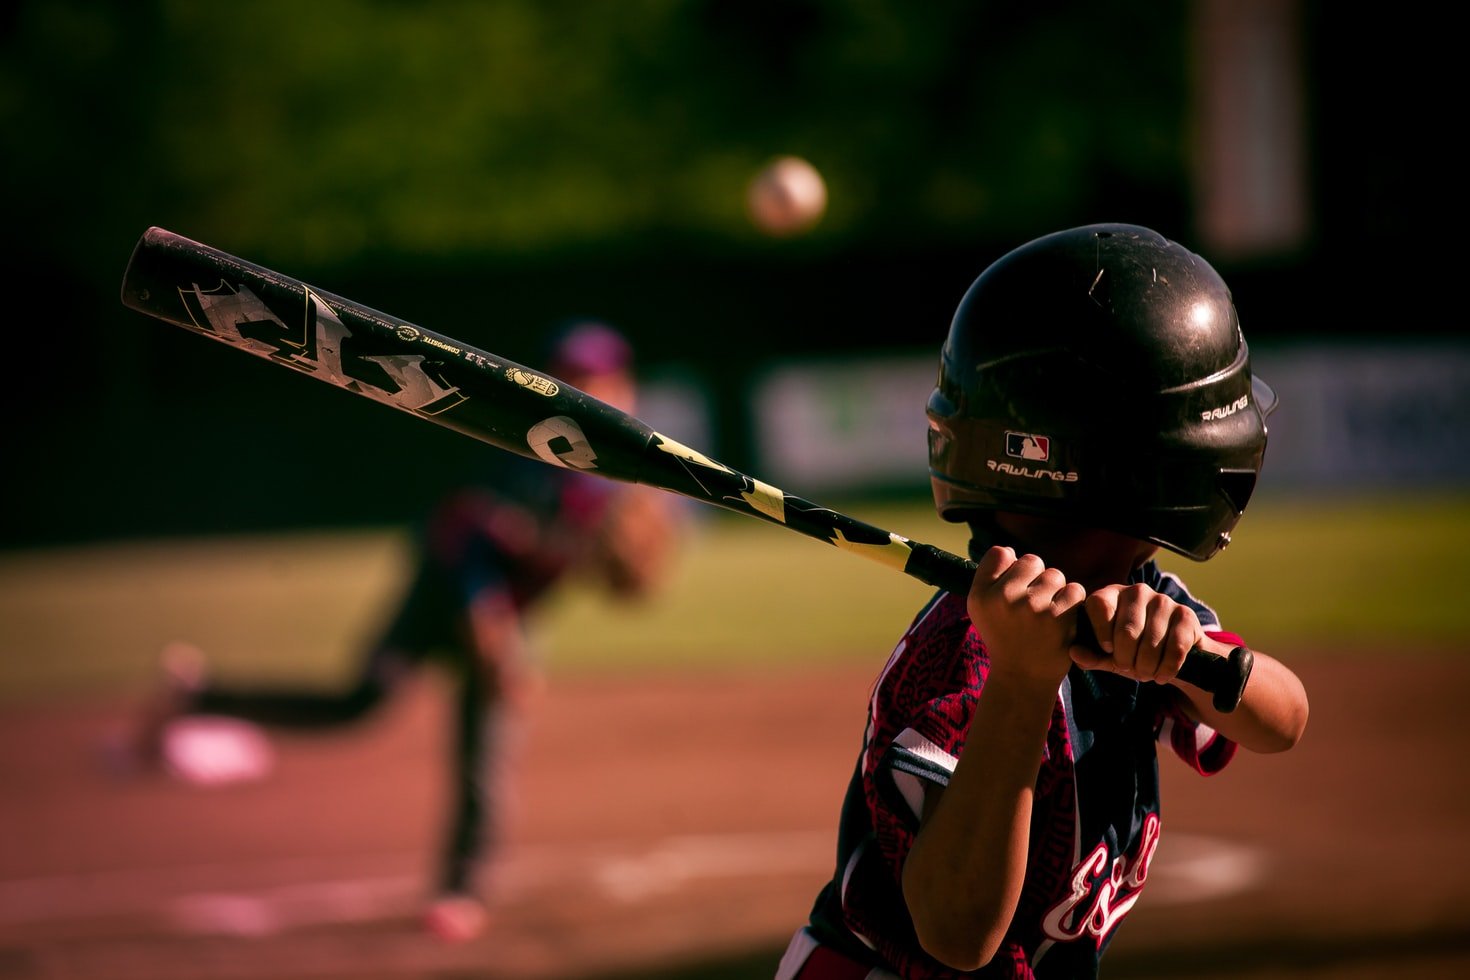 Will first noticed the woman watching him at a baseball game | Source: Unsplash